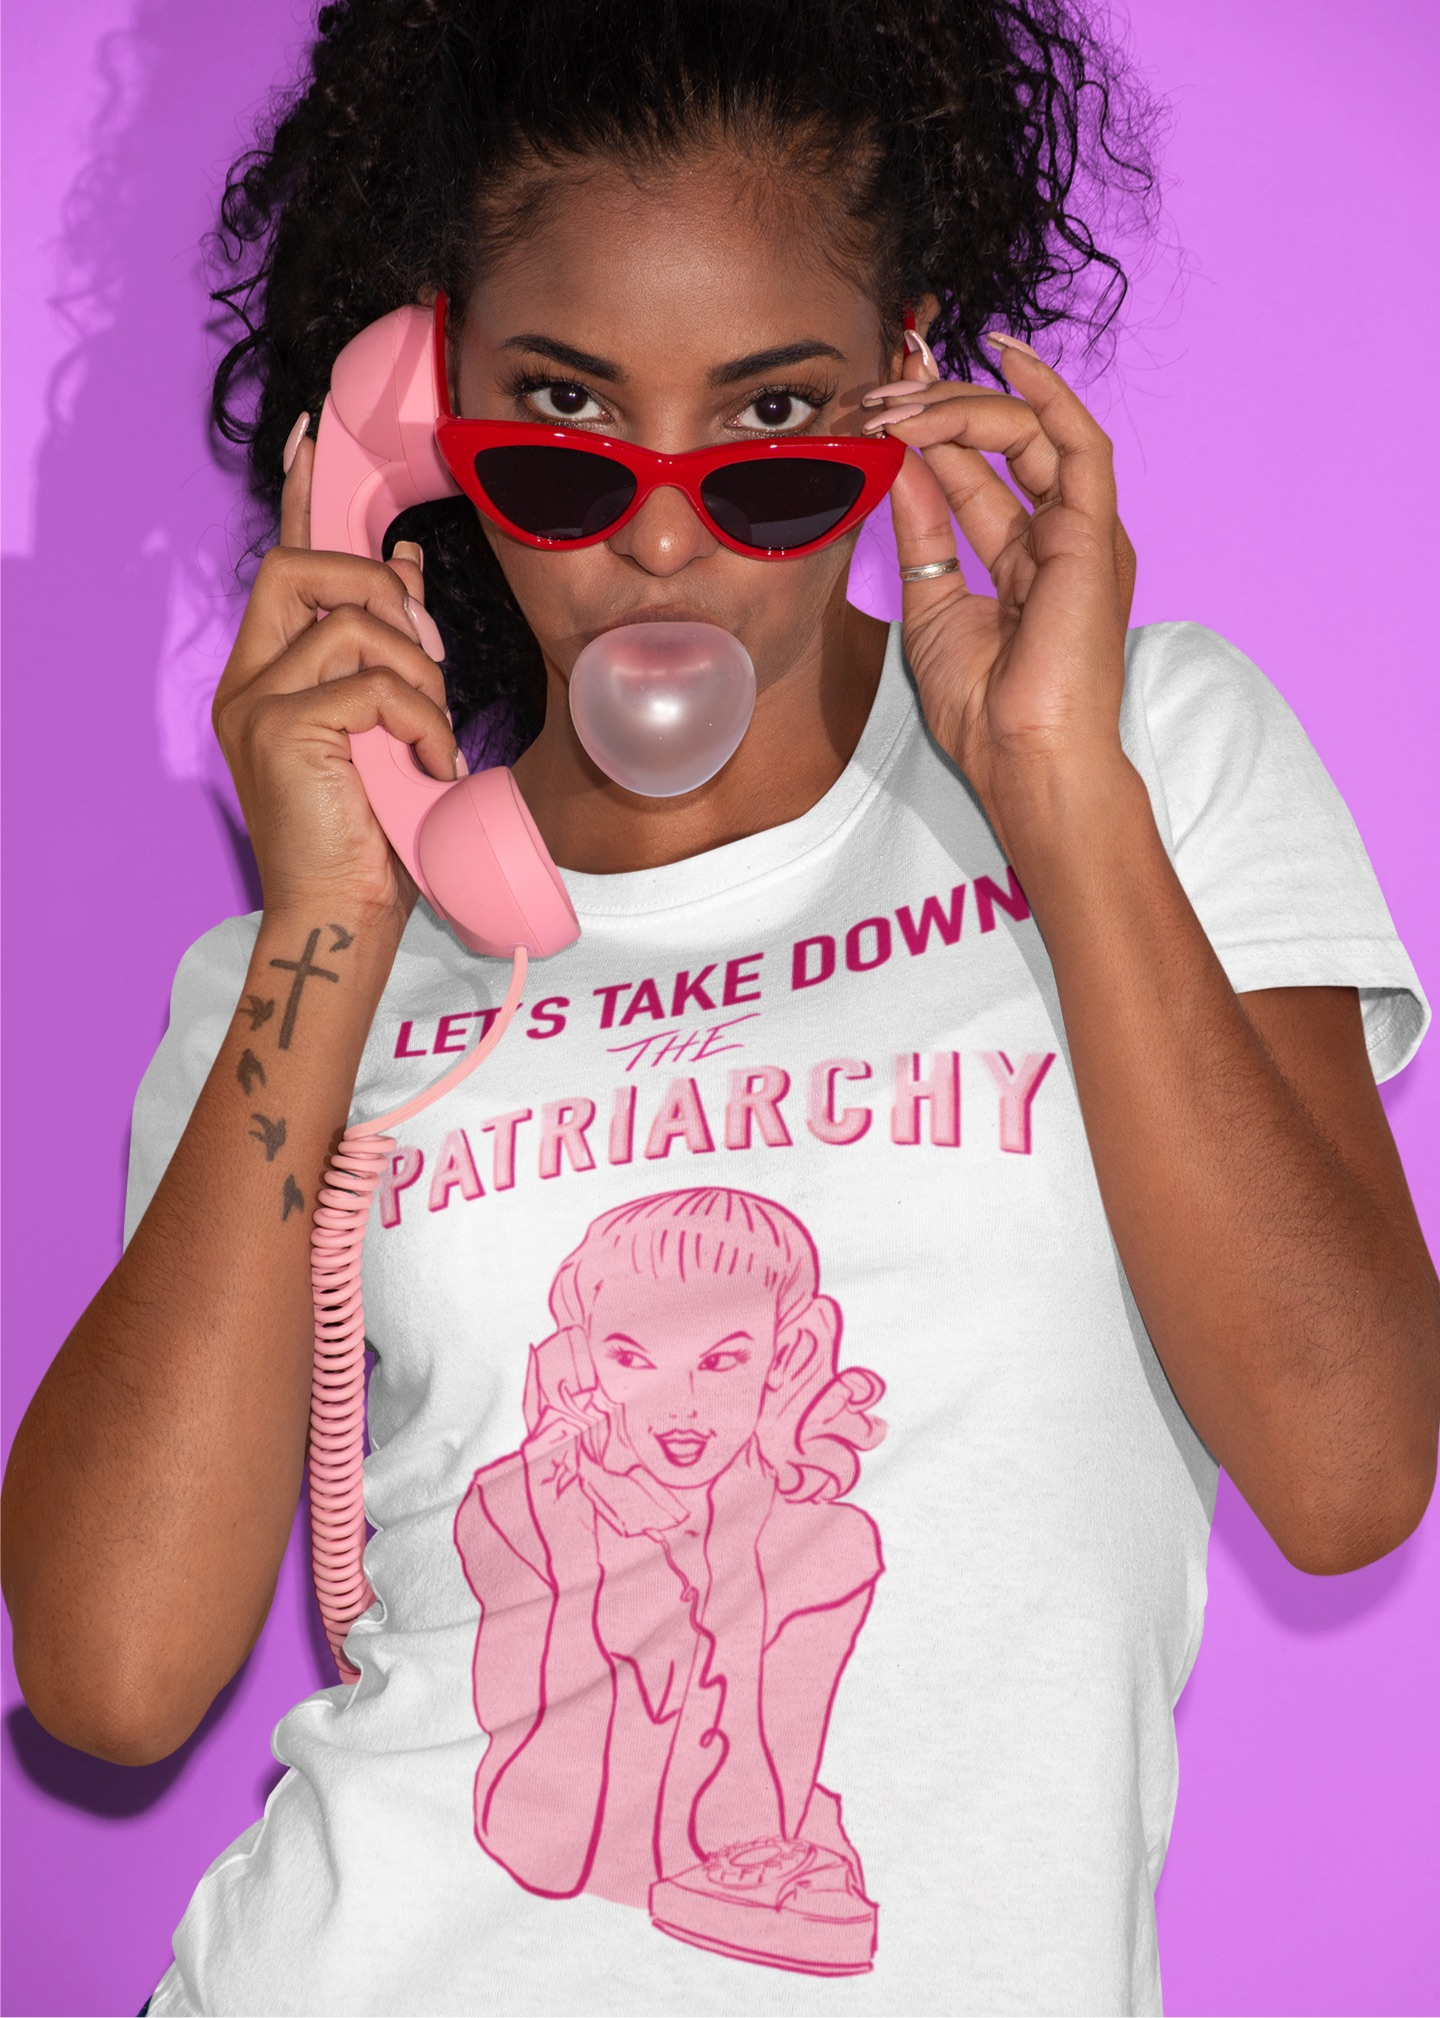 Lets Take Down The Patriarchy Tee in Black or White